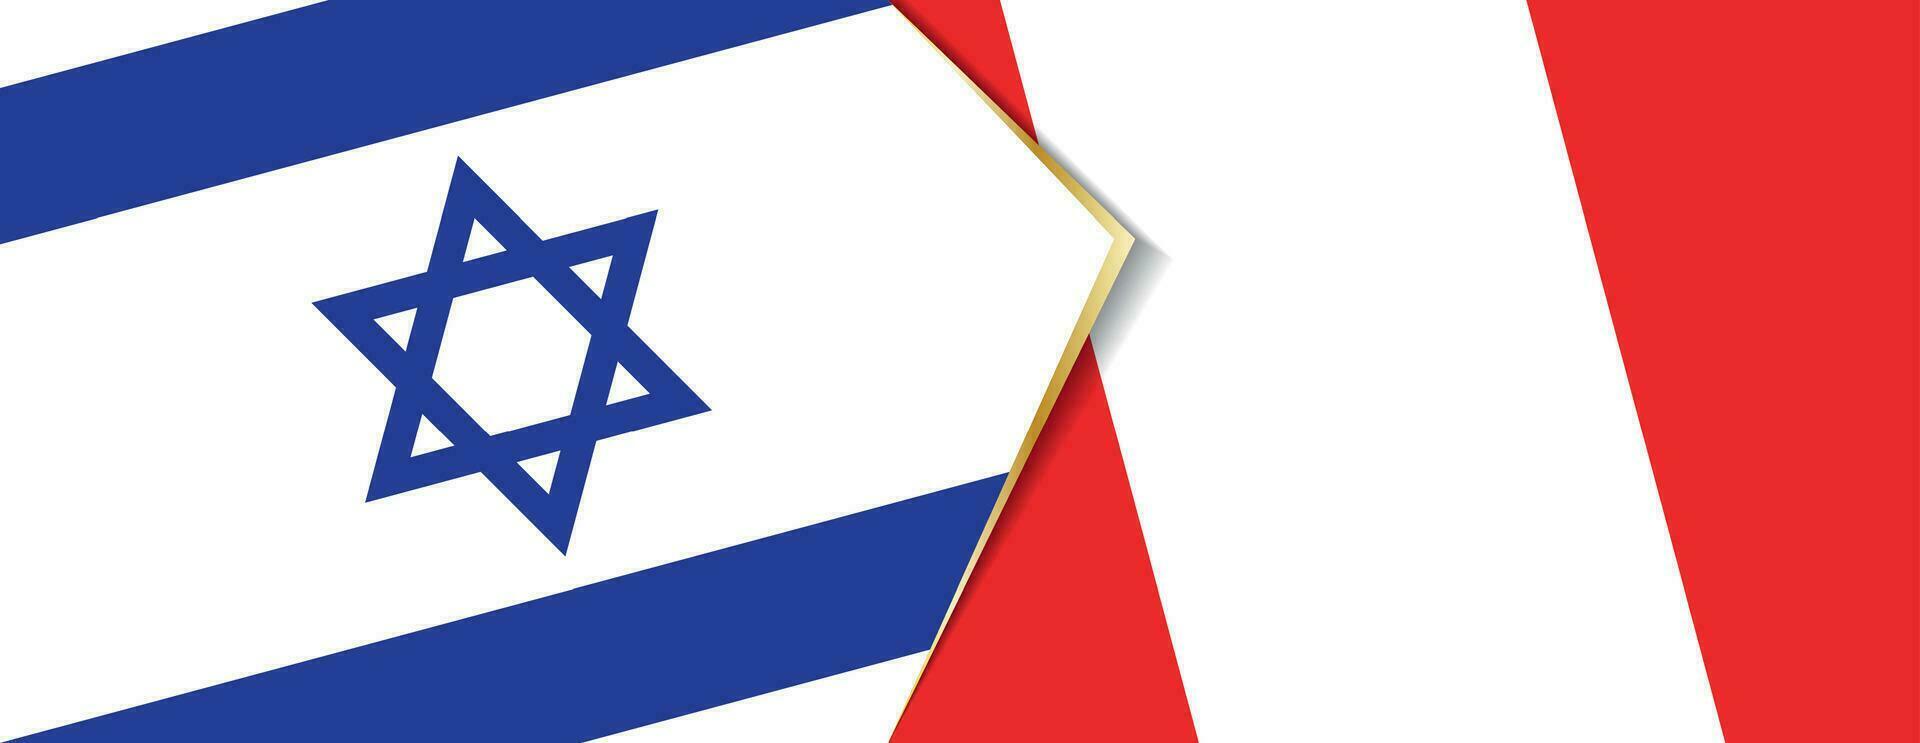 Israel and Peru flags, two vector flags.